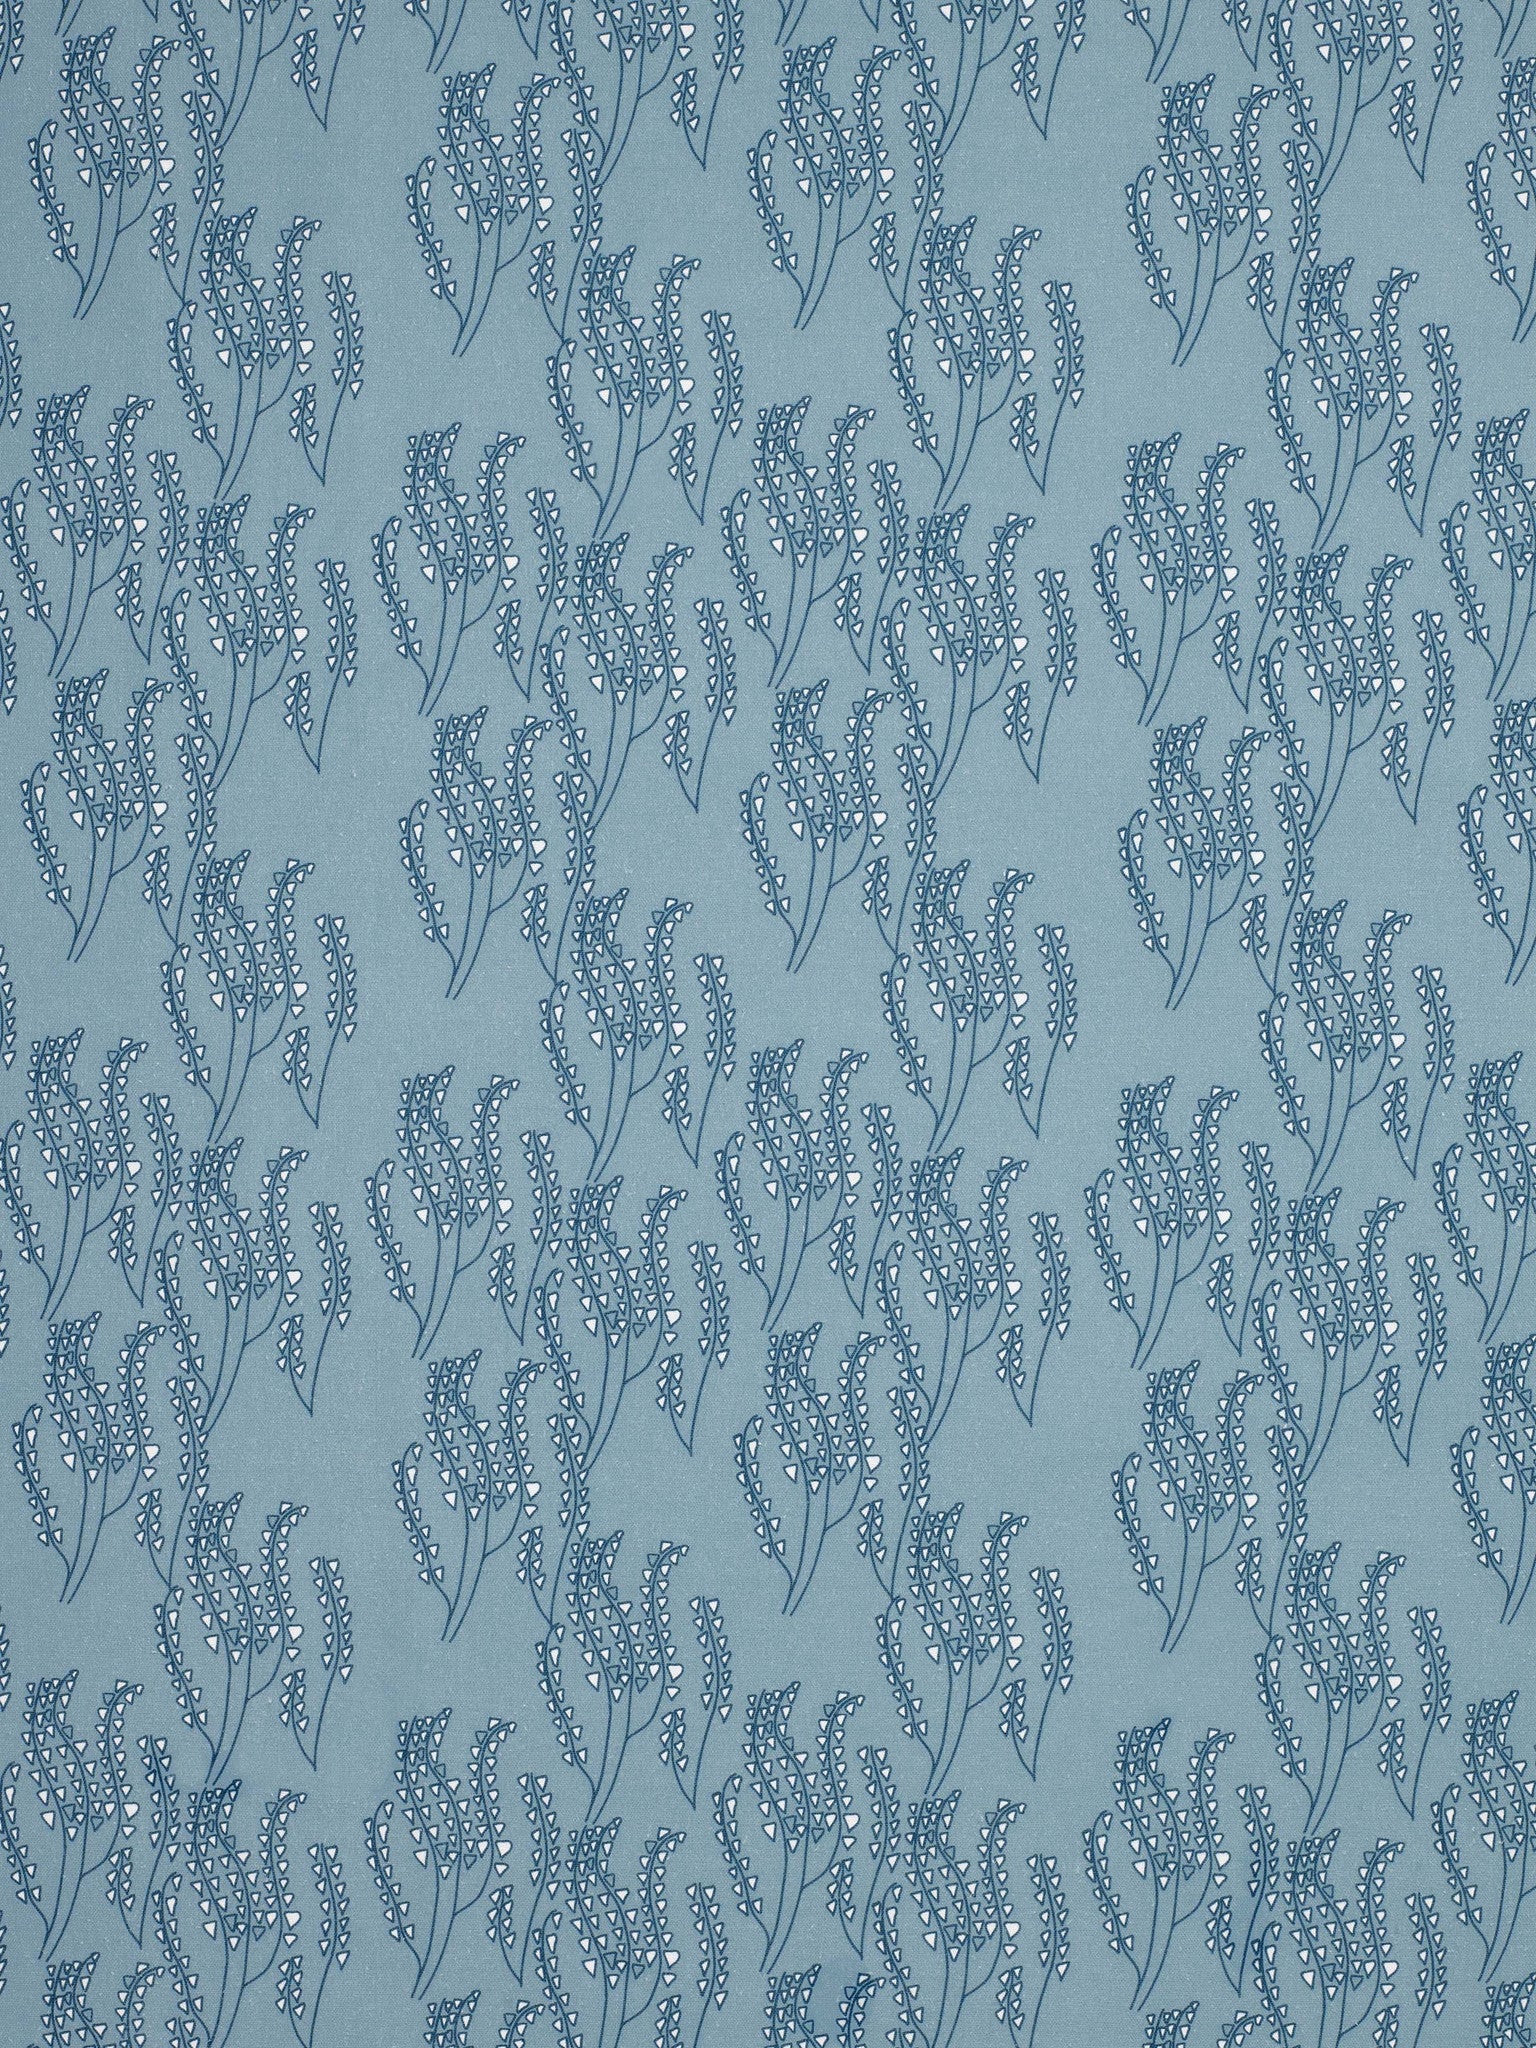 Maricopa Graphic Floral Pattern Cotton Linen Home Decor Fabric but he meter or by the yard in Light Chambray Blue for curtains, blinds, upholstery ships from Canada worldwide (USA)